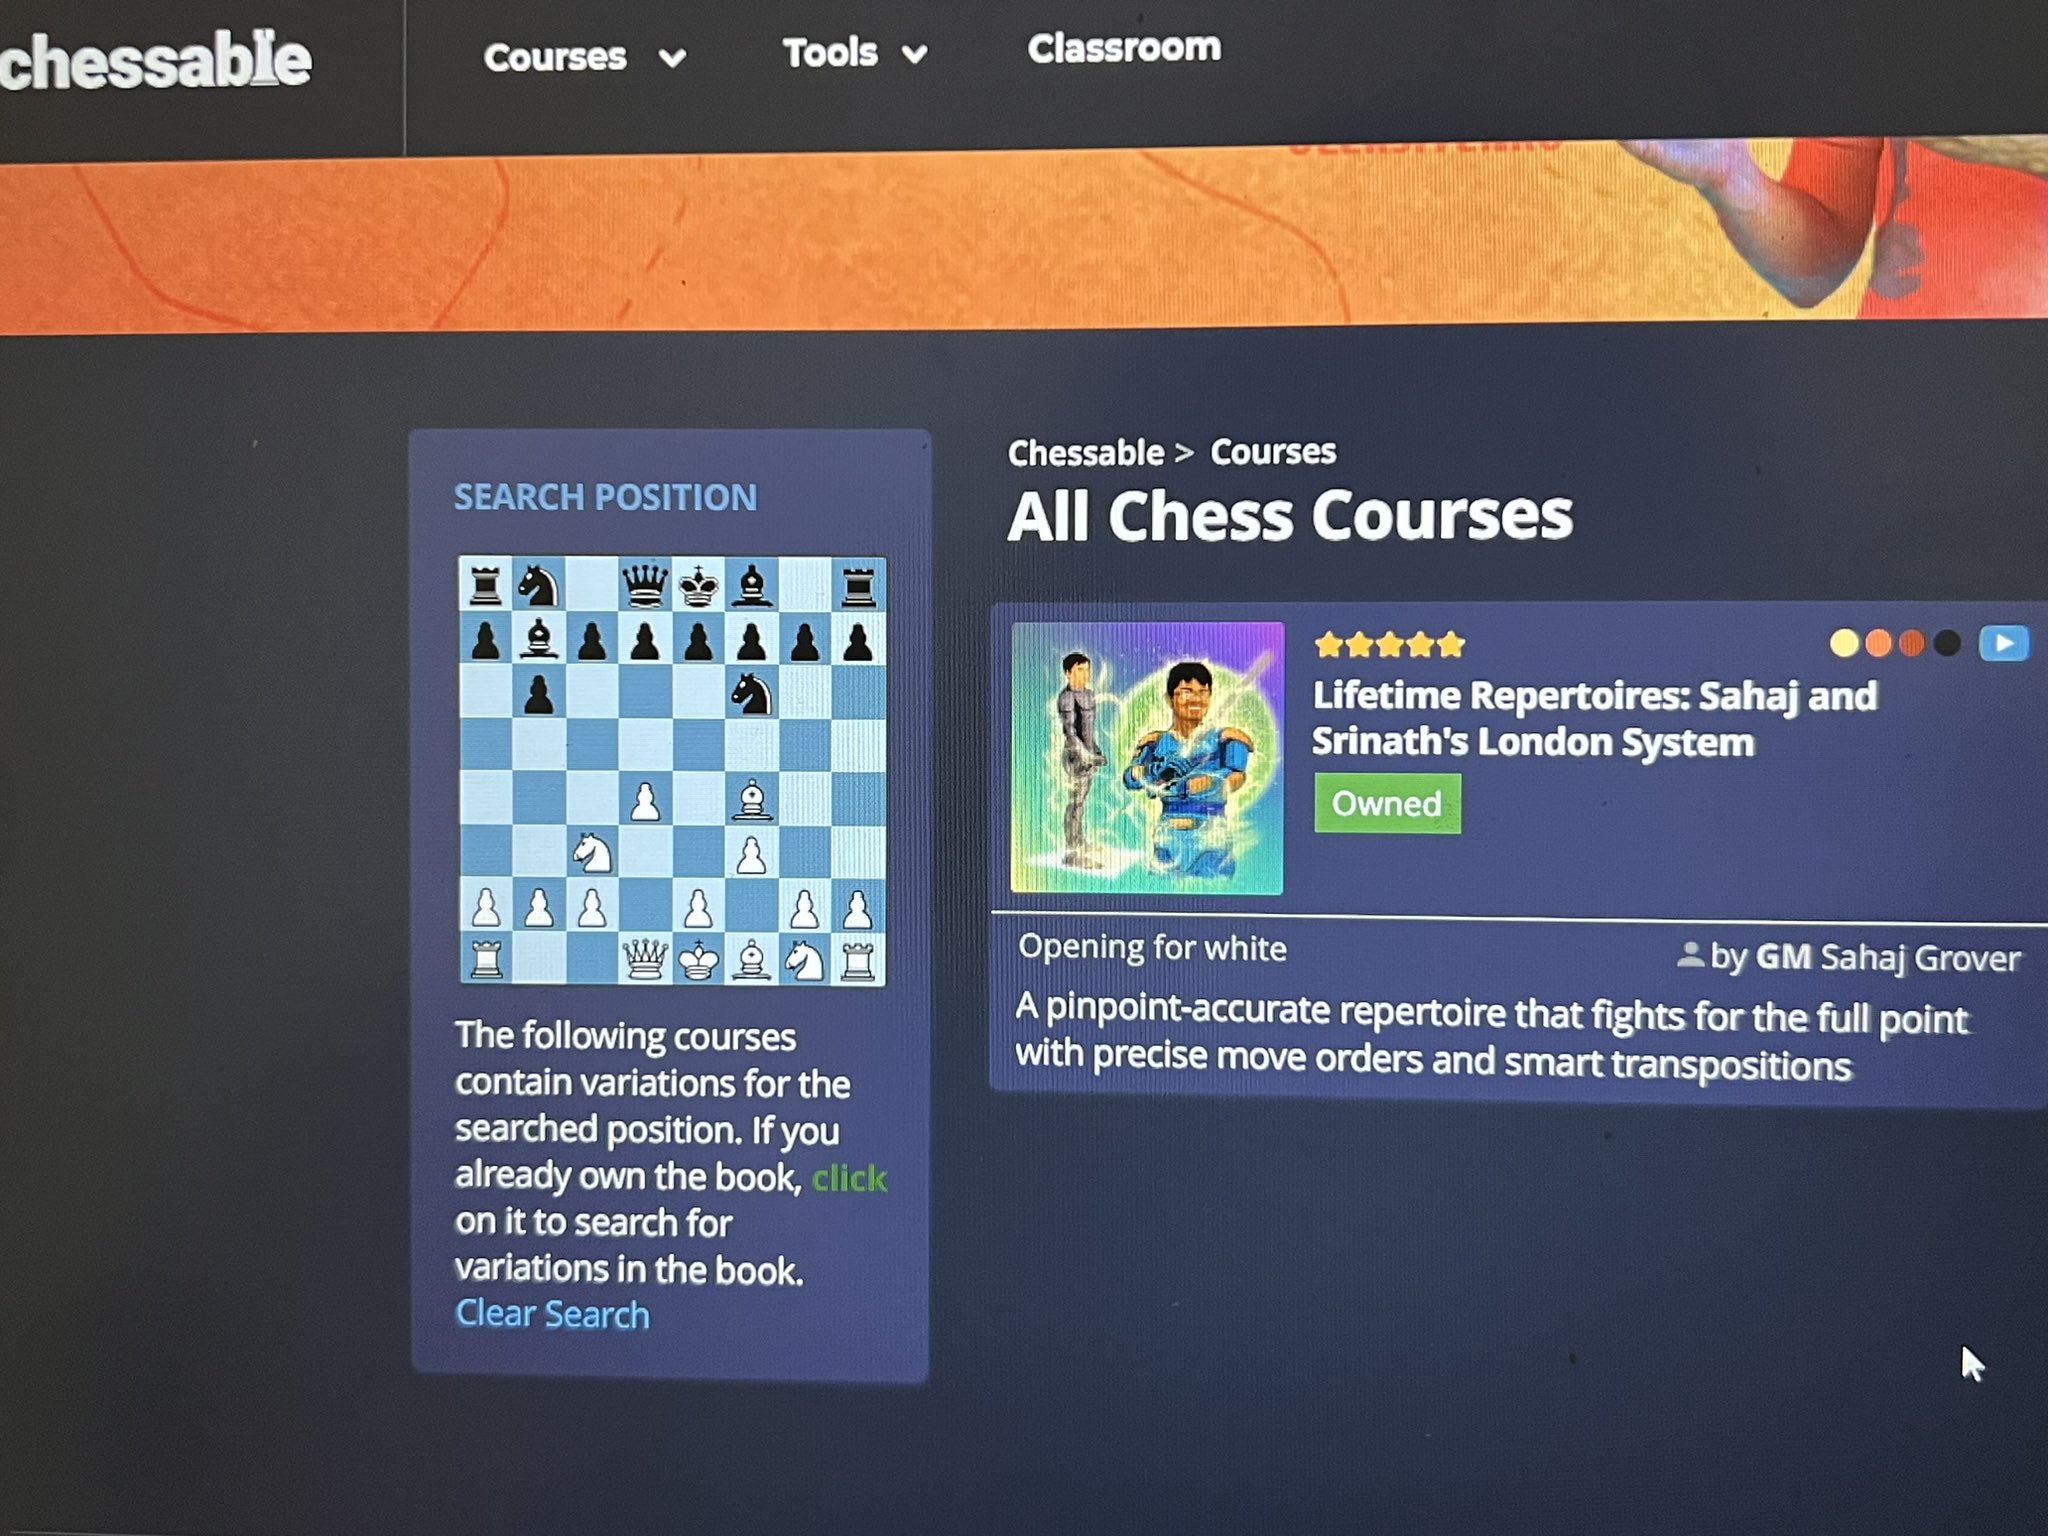 Black Friday deals: Chessable runs its biggest sale of the year